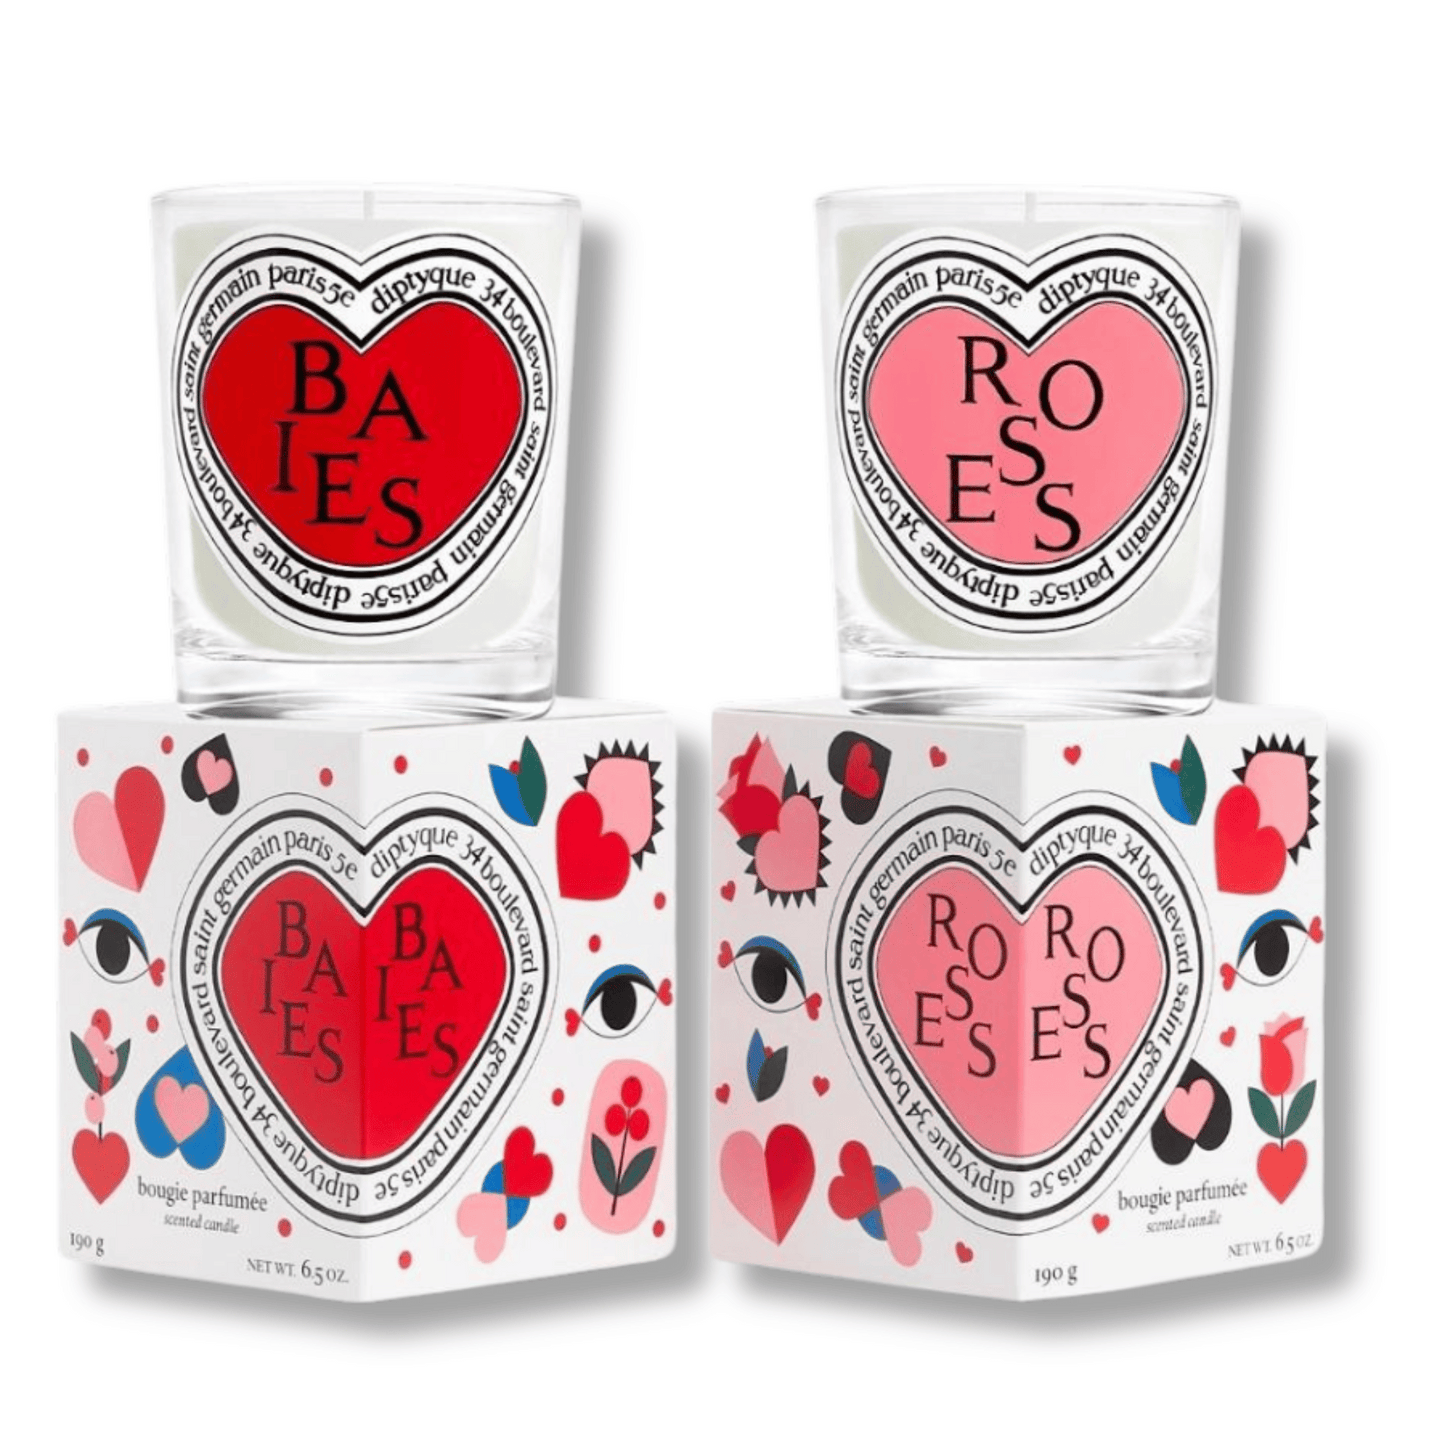  Image of Valentine's Duo - Baies and Roses Candle Set